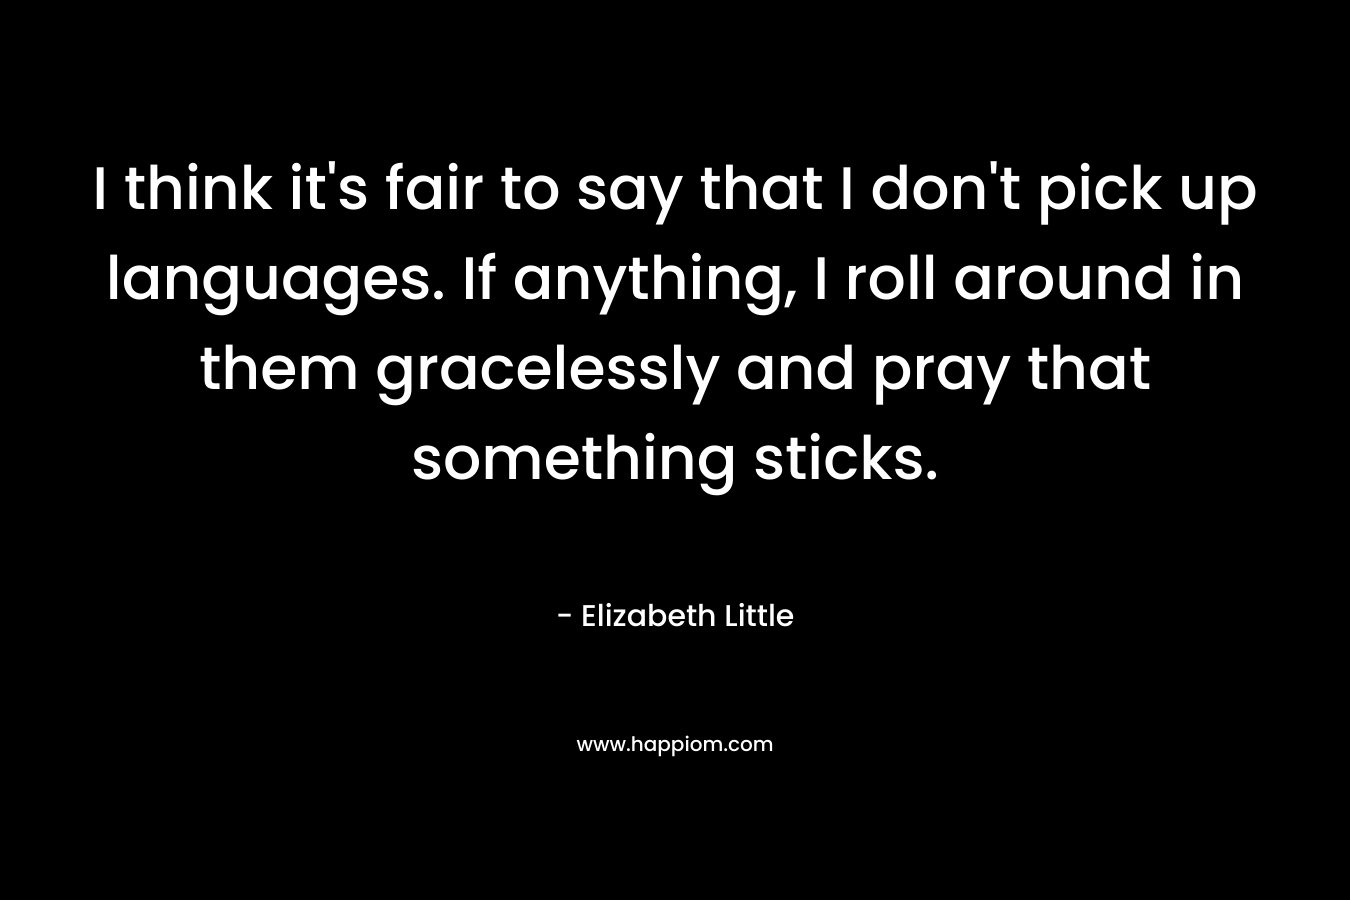 I think it’s fair to say that I don’t pick up languages. If anything, I roll around in them gracelessly and pray that something sticks. – Elizabeth Little